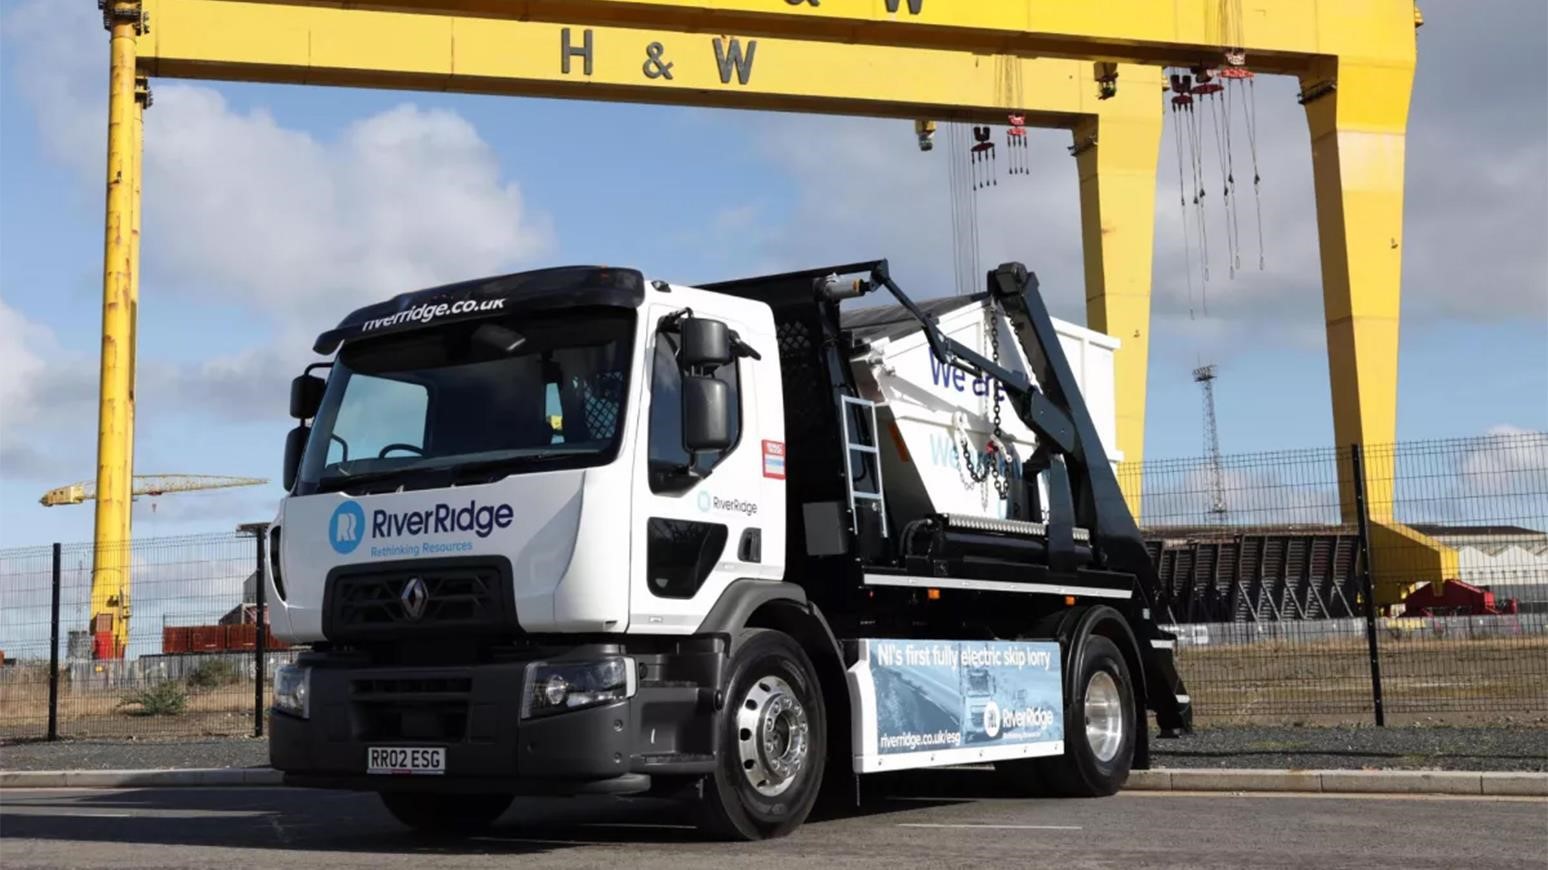 RiverRidge Acquires Renault E-tech D Wide, Northern Ireland’s First Electric Skip Loader Truck